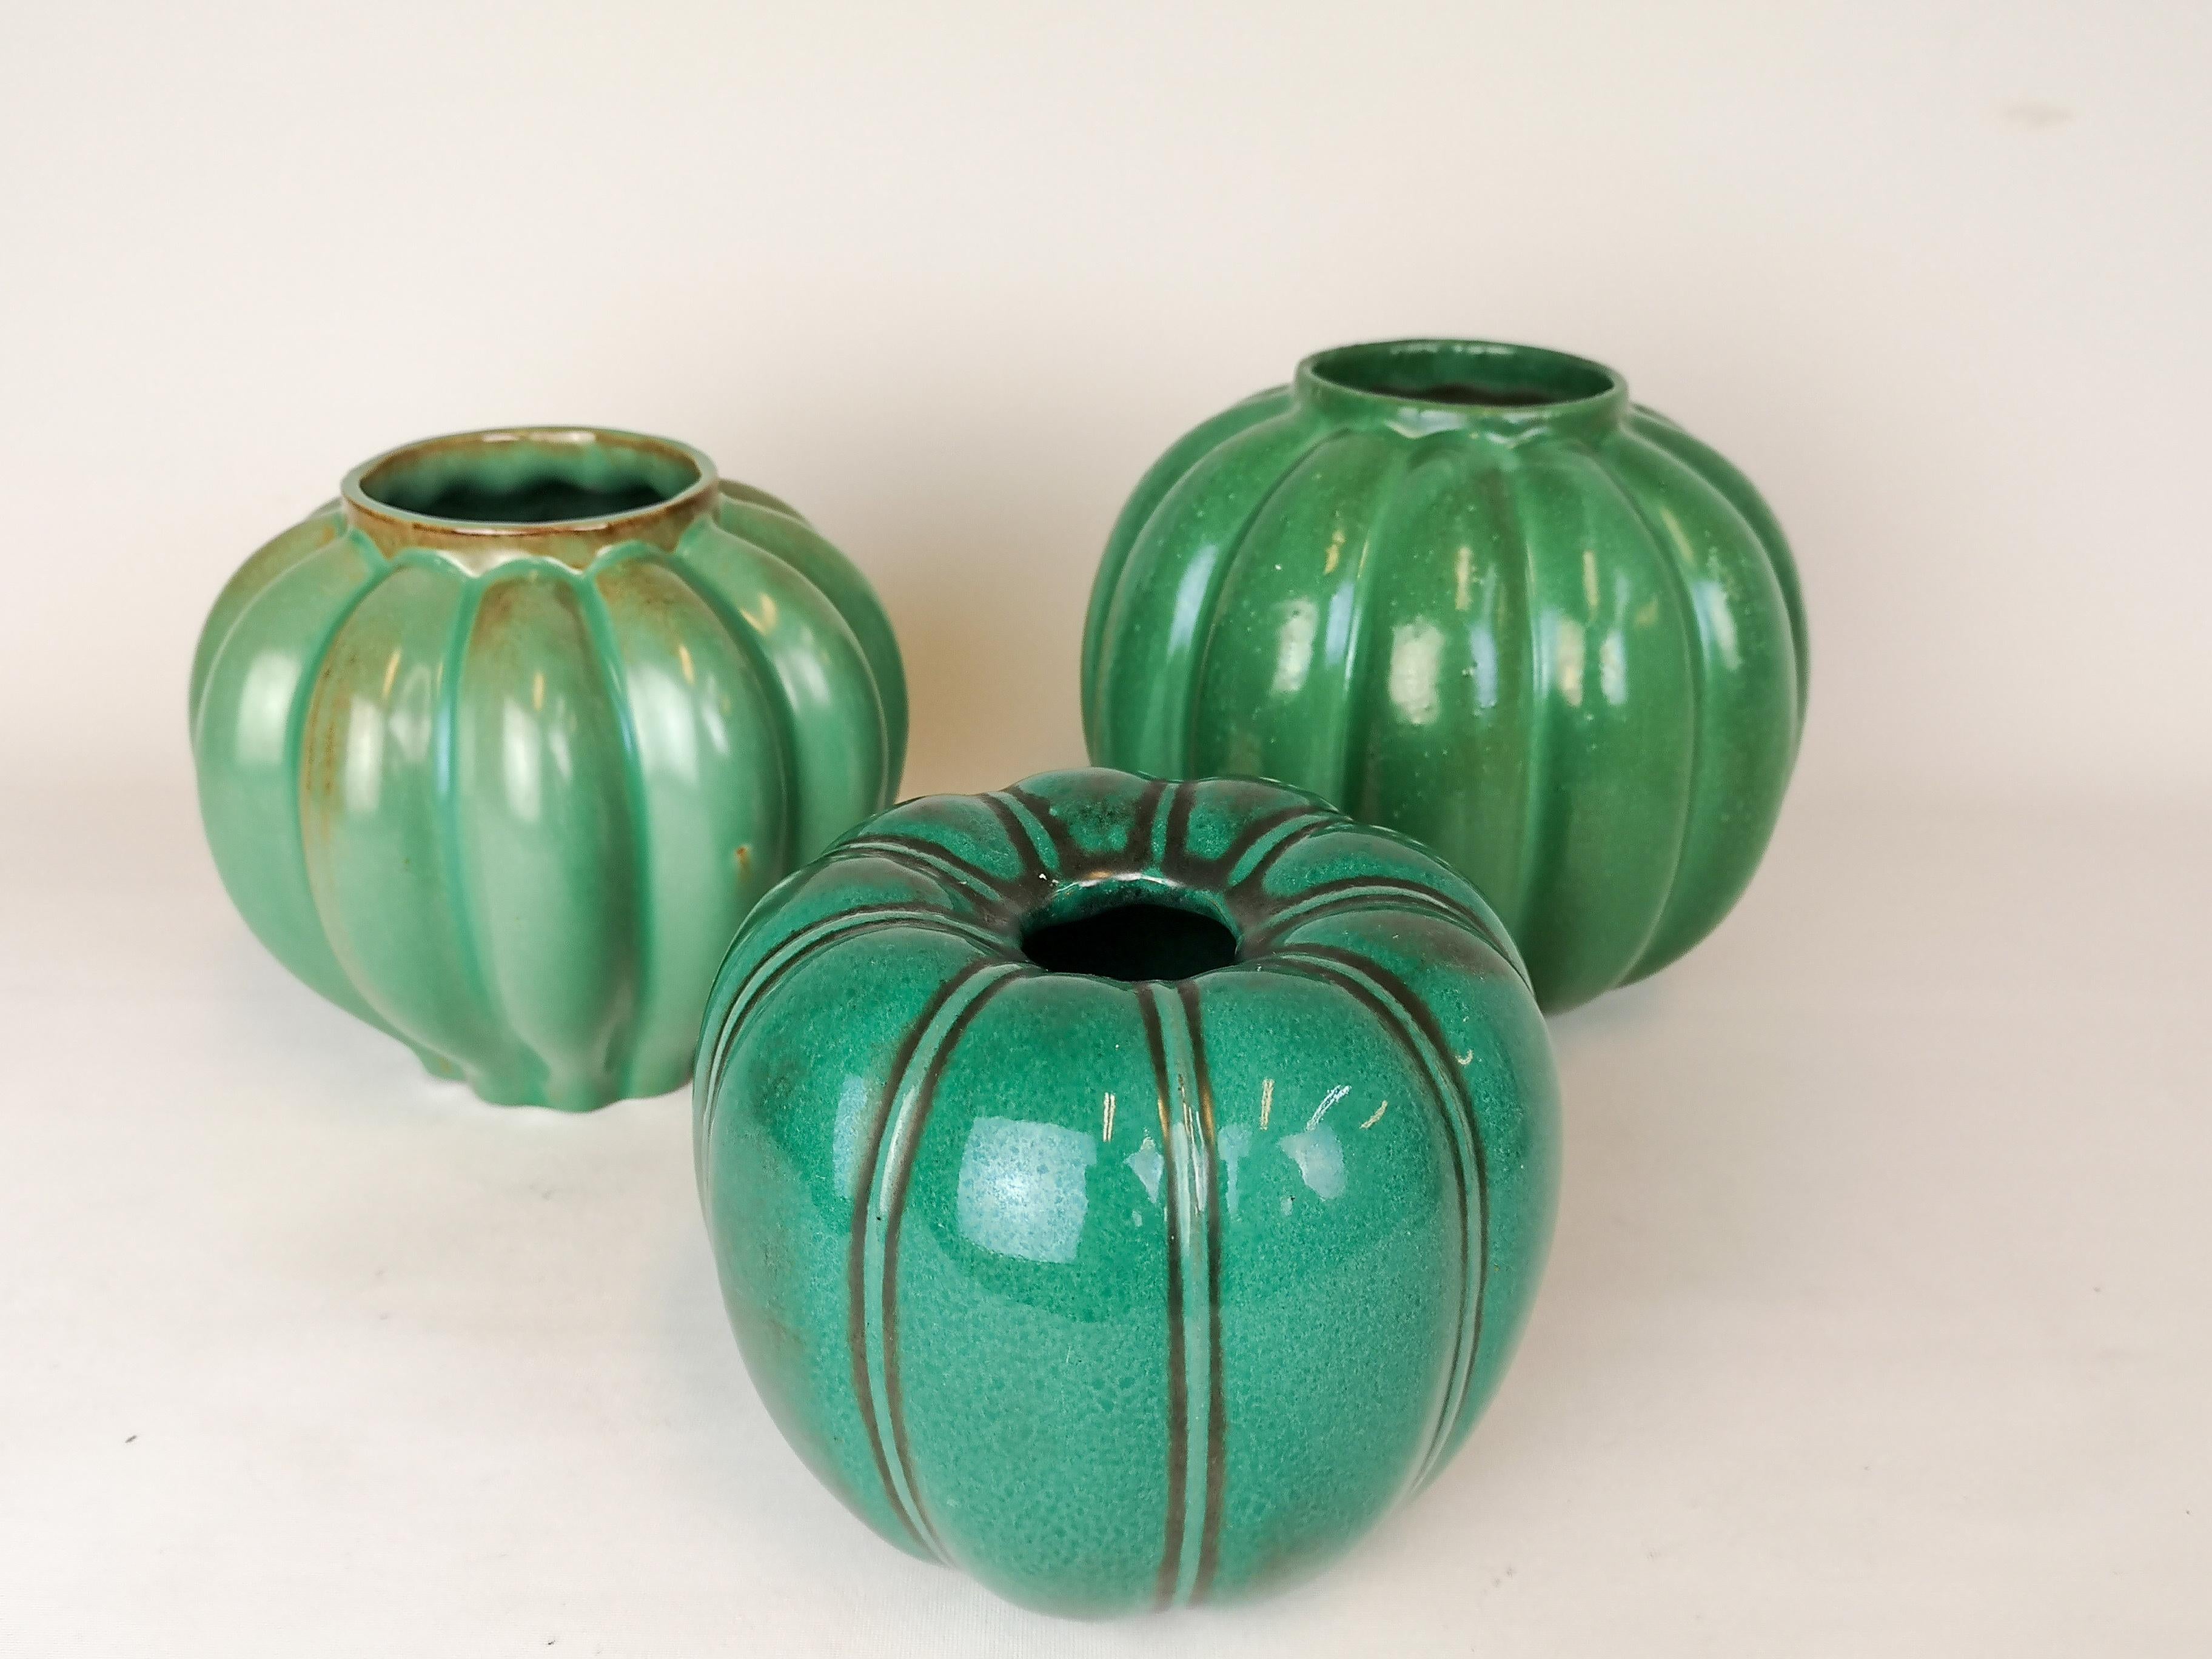 This collection of totally 13 pieces green Art Deco vases was manufactured in Sweden during the 1930s-1940s. There are 10 pieces of Ekeby, 2 pieces Bofajans Ewald Dahlskog and one piece from Höganäs.

The shapes and form combines perfect with the